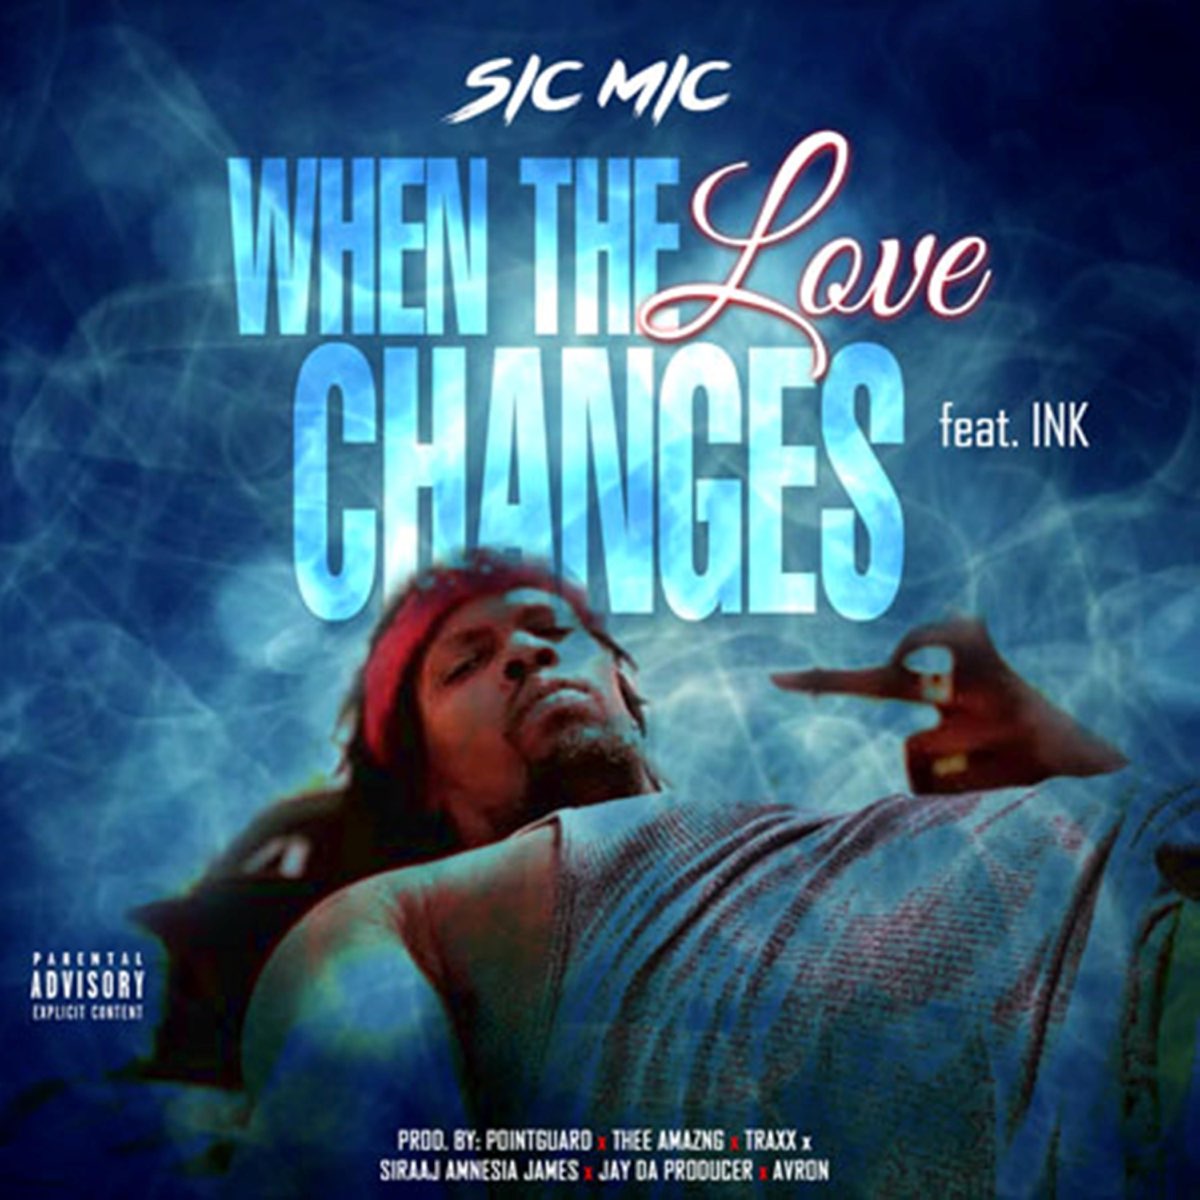 When the Love Changes (feat. INK) - Single by Sic Mic on Apple Music